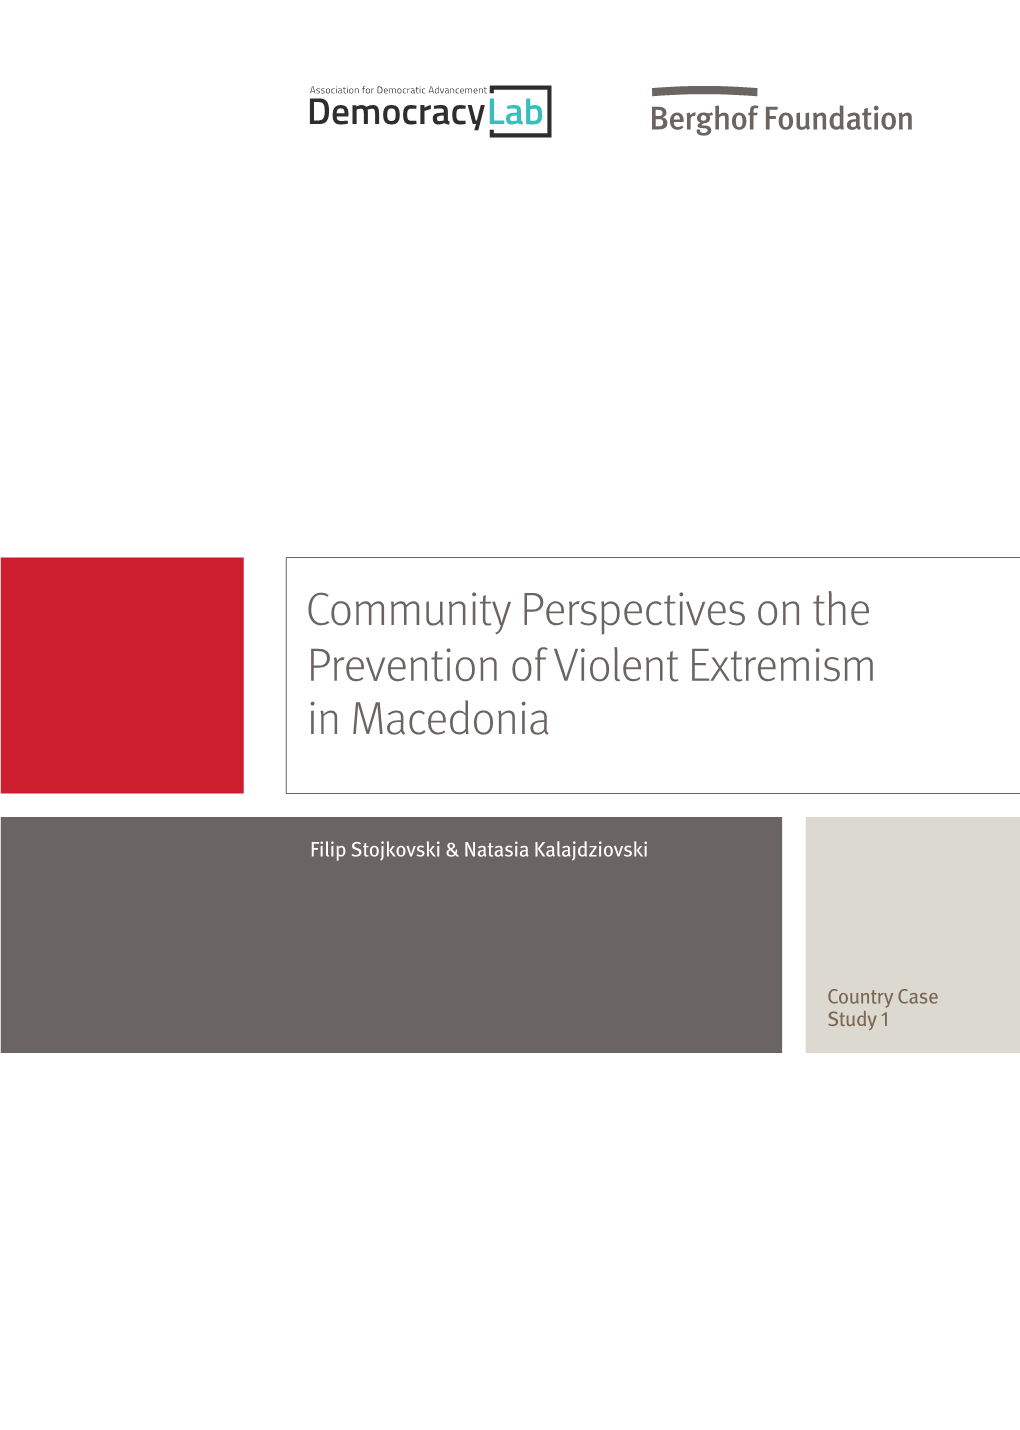 Community Perspectives on Preventing Violent Extremism In